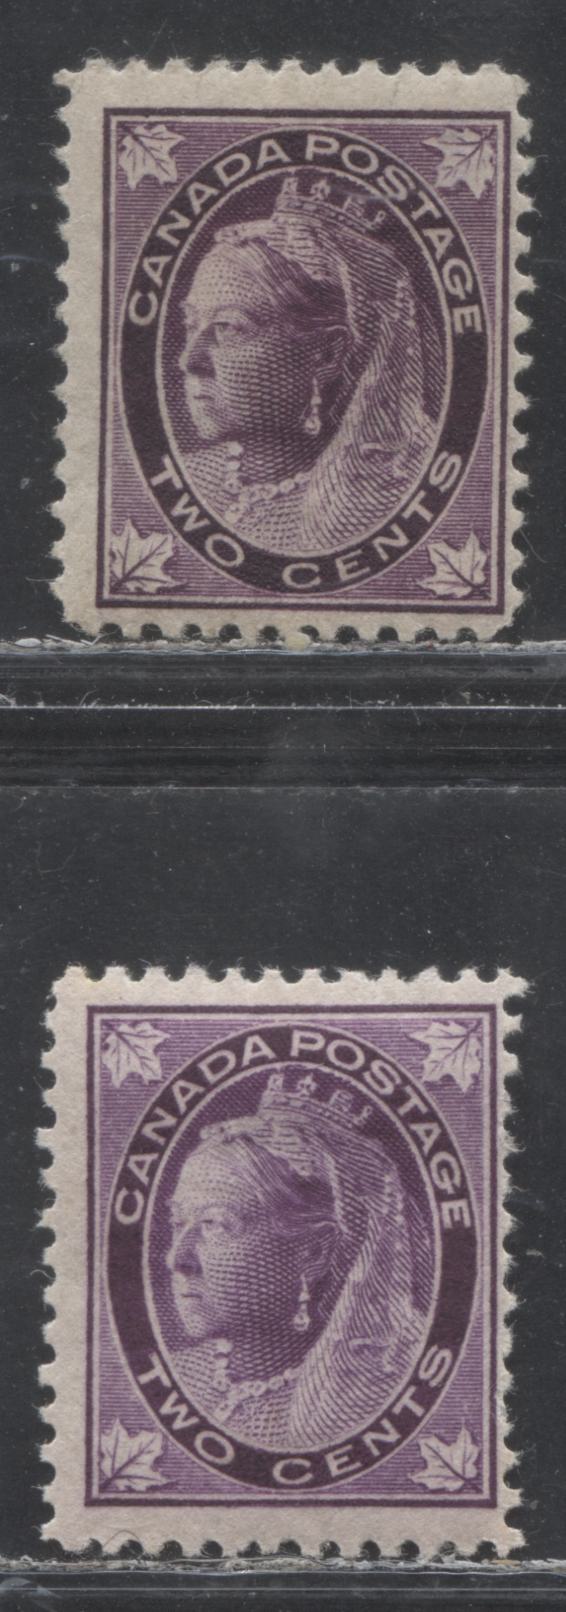 Lot 173 Canada #68 2c Purple and Bright Purple Queen Victoria, 1897-1898 Maple Leaf Issue, A Two Fine OG Singles On Vertical Wove Paper, Perf 12